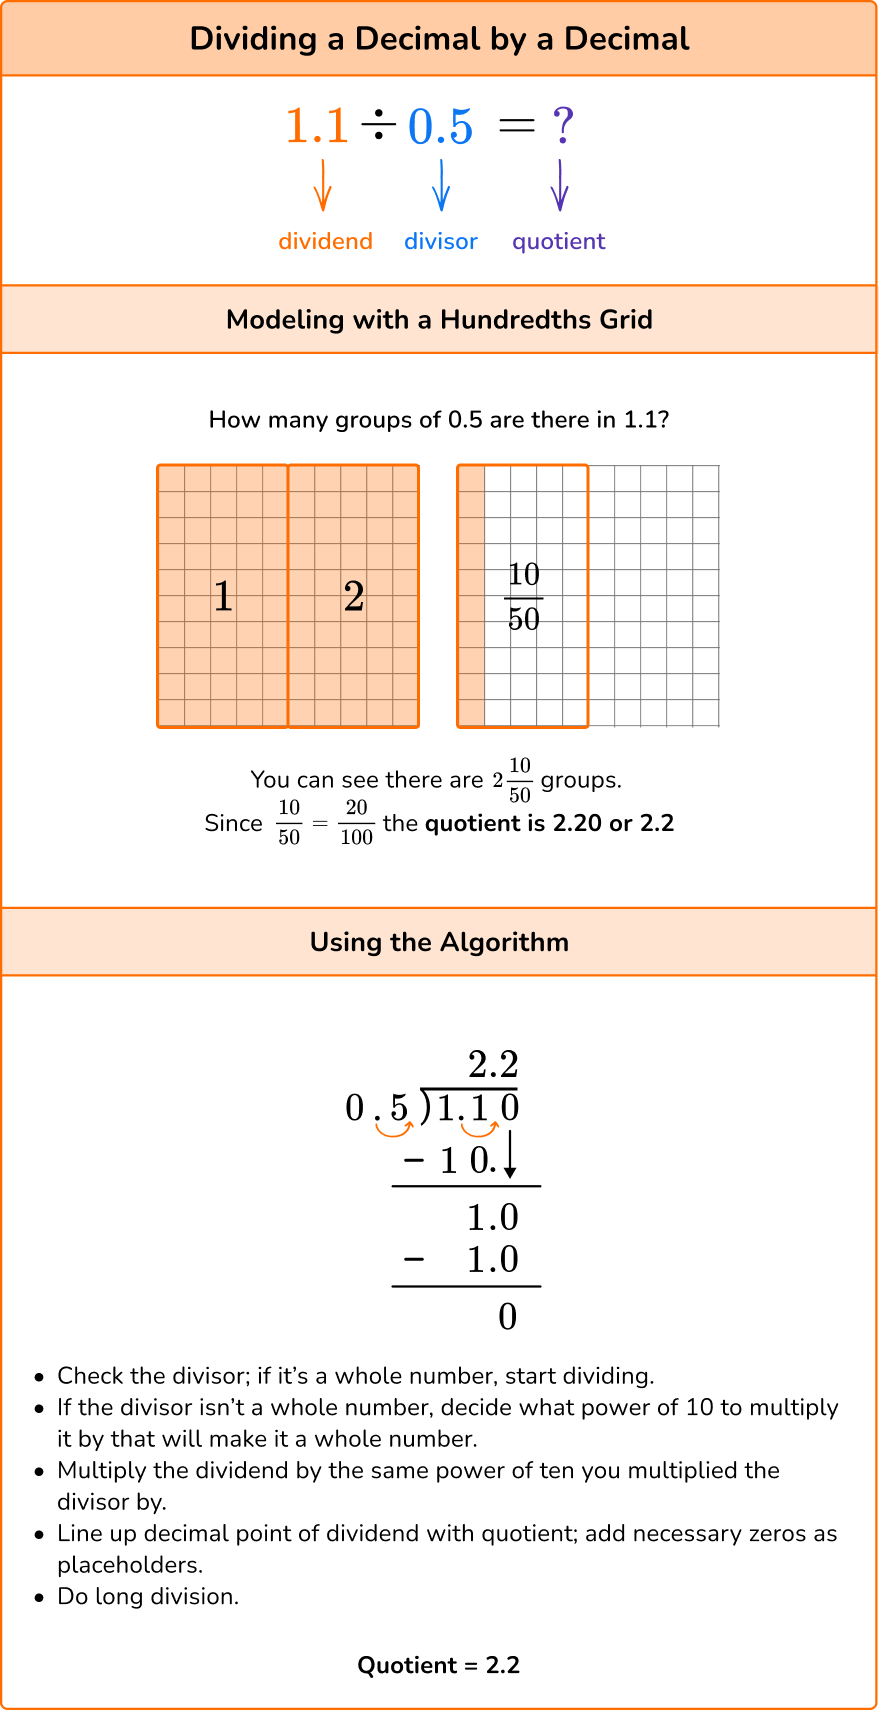 Multiplying and Dividing Decimals Image 2.3